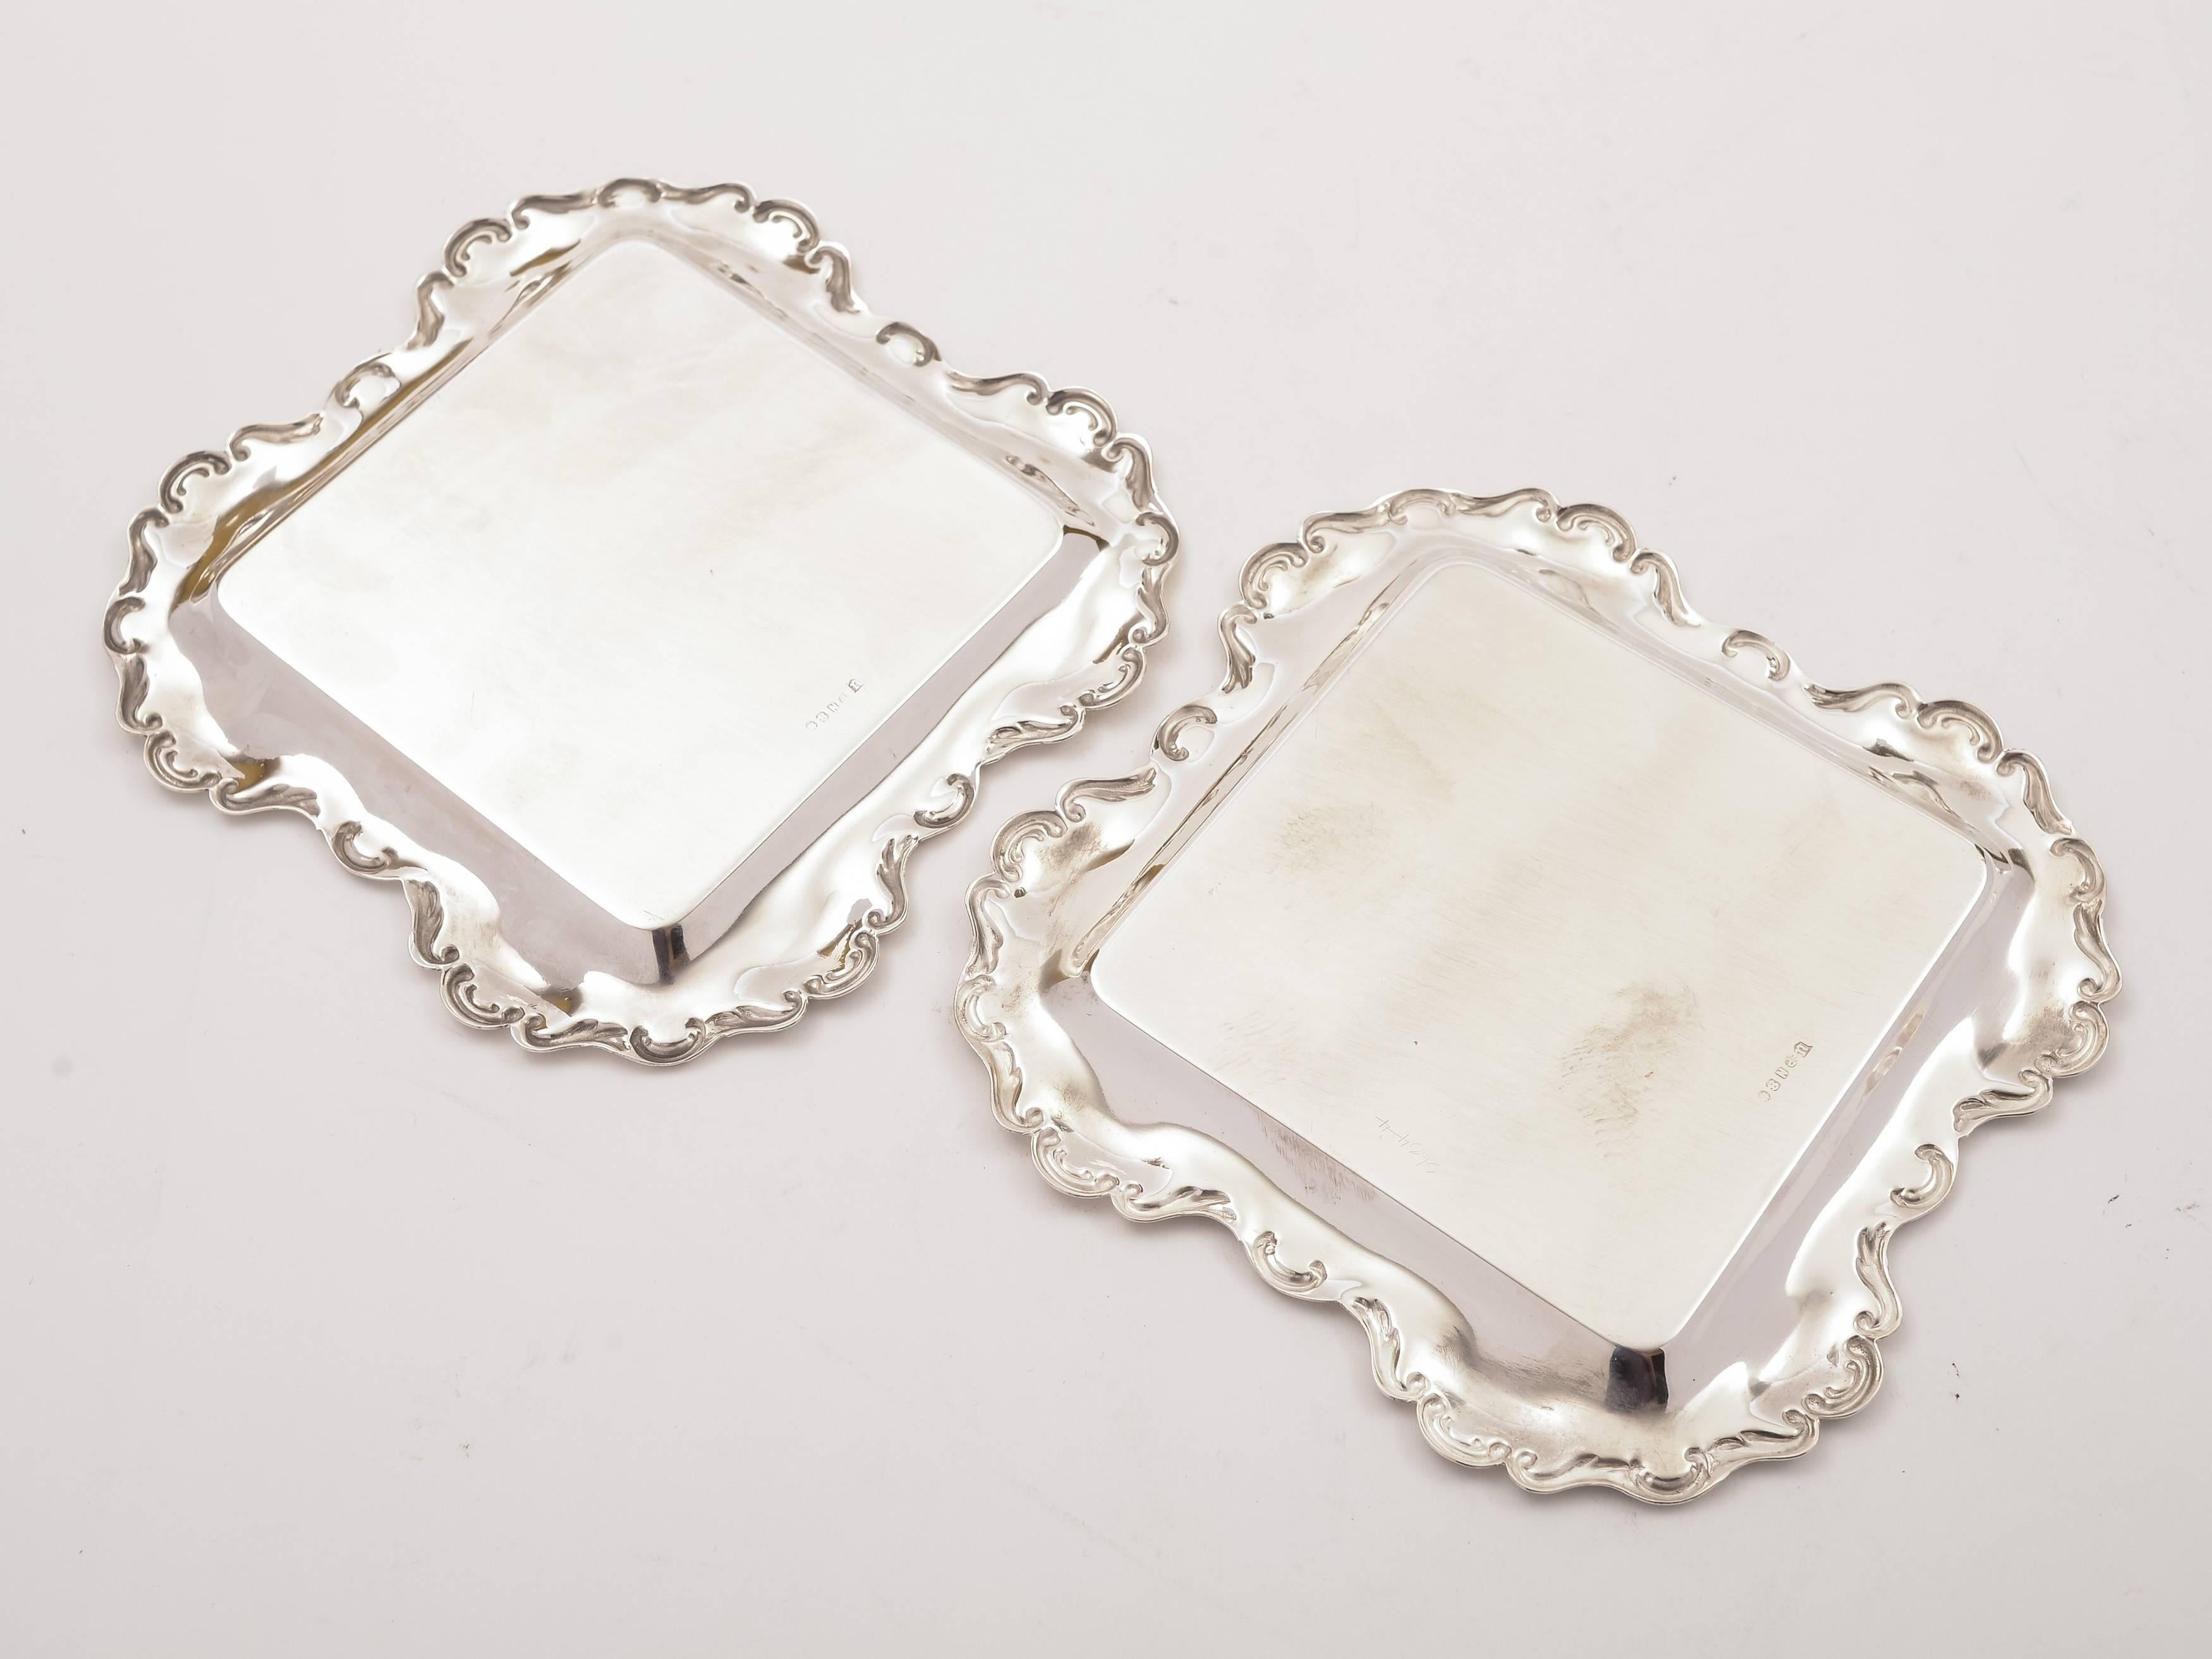 A nice pair of English Edwardian silver plated square card trays with embossed decoration to edges. Circa 1905.

FREE worldwide delivery. 

Measurements:
Height: 1/4" (approx 0.5cm)
Length & Width: 6 1/4" square (approx 15.5cm)
Total